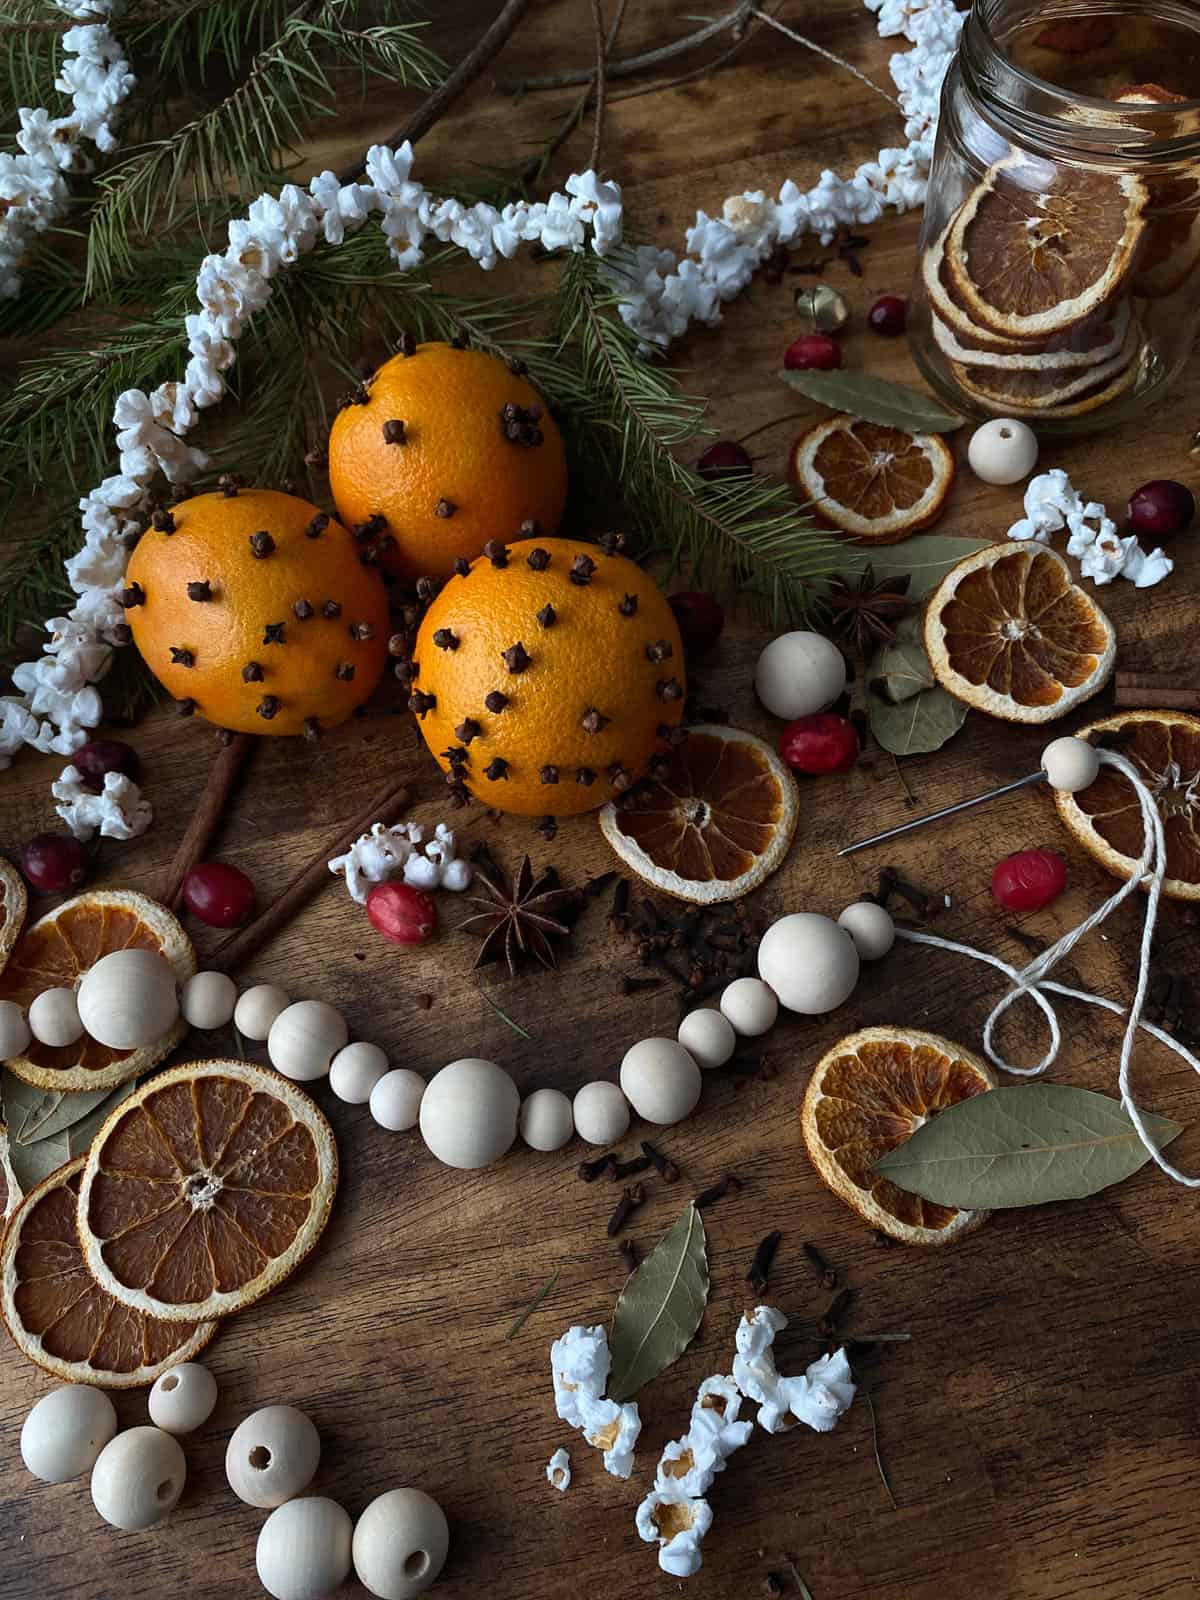 three orange pomanders are surrounded by a popcorn garland, pine branches, dried orange slices, cranberries, popcorn, star anise, and a string of wooden beads being made.